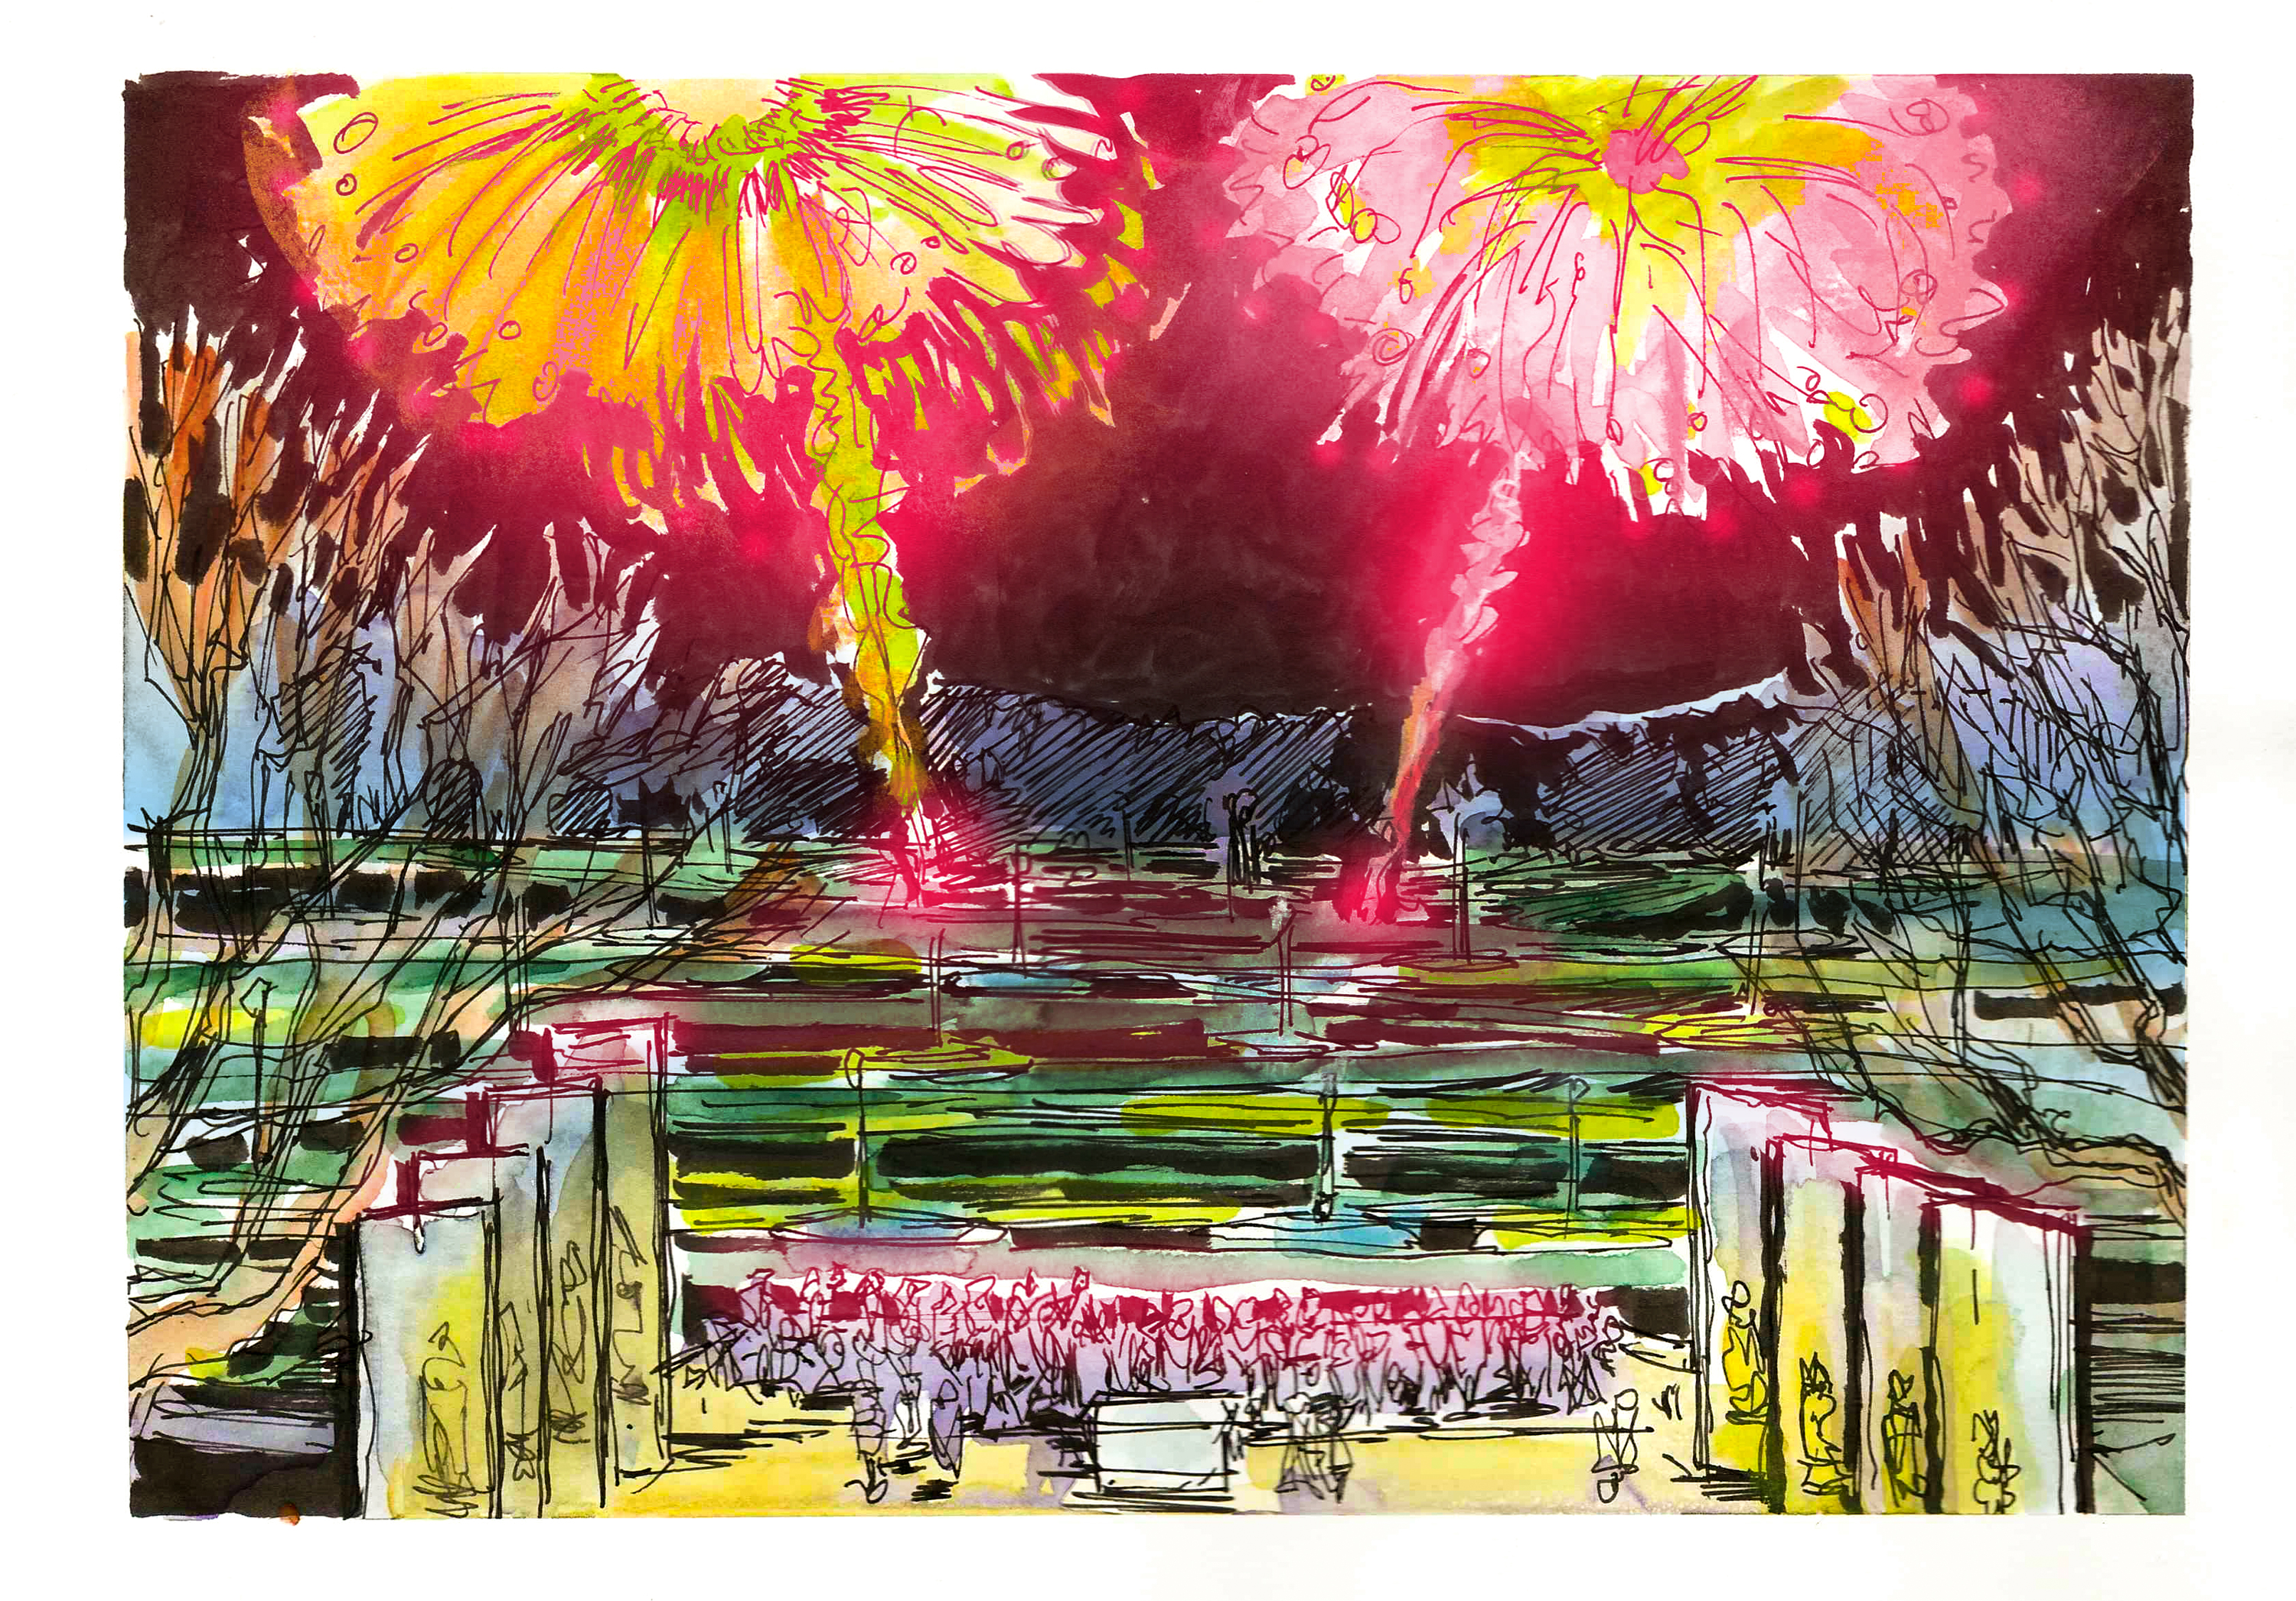 Ink and watercolor sketch of the Drillfield with Fireworks